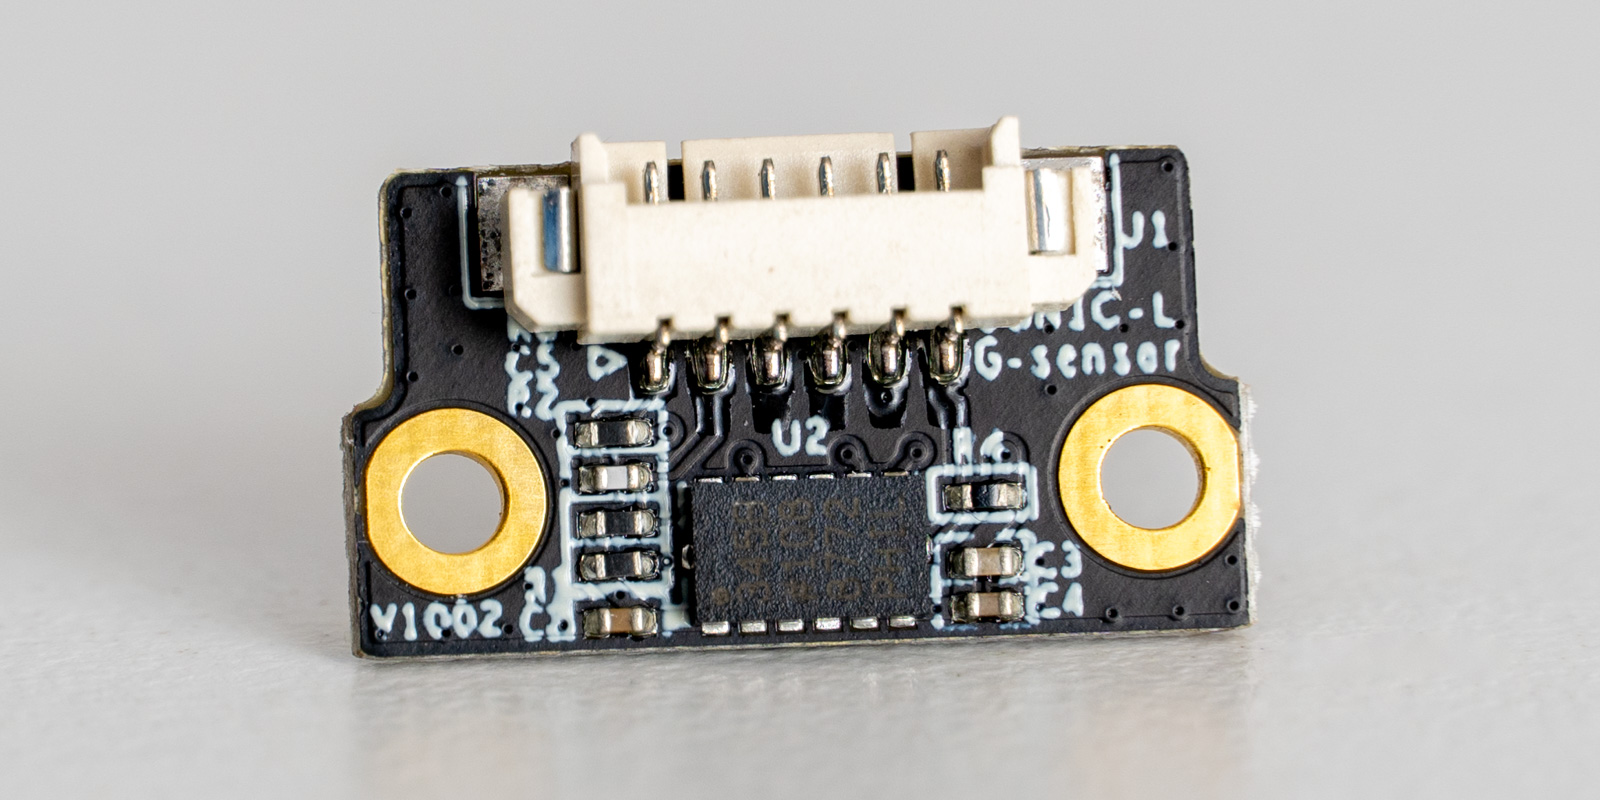 An ADXL345 Klipper accelerometer for input shaping in 3D printing.